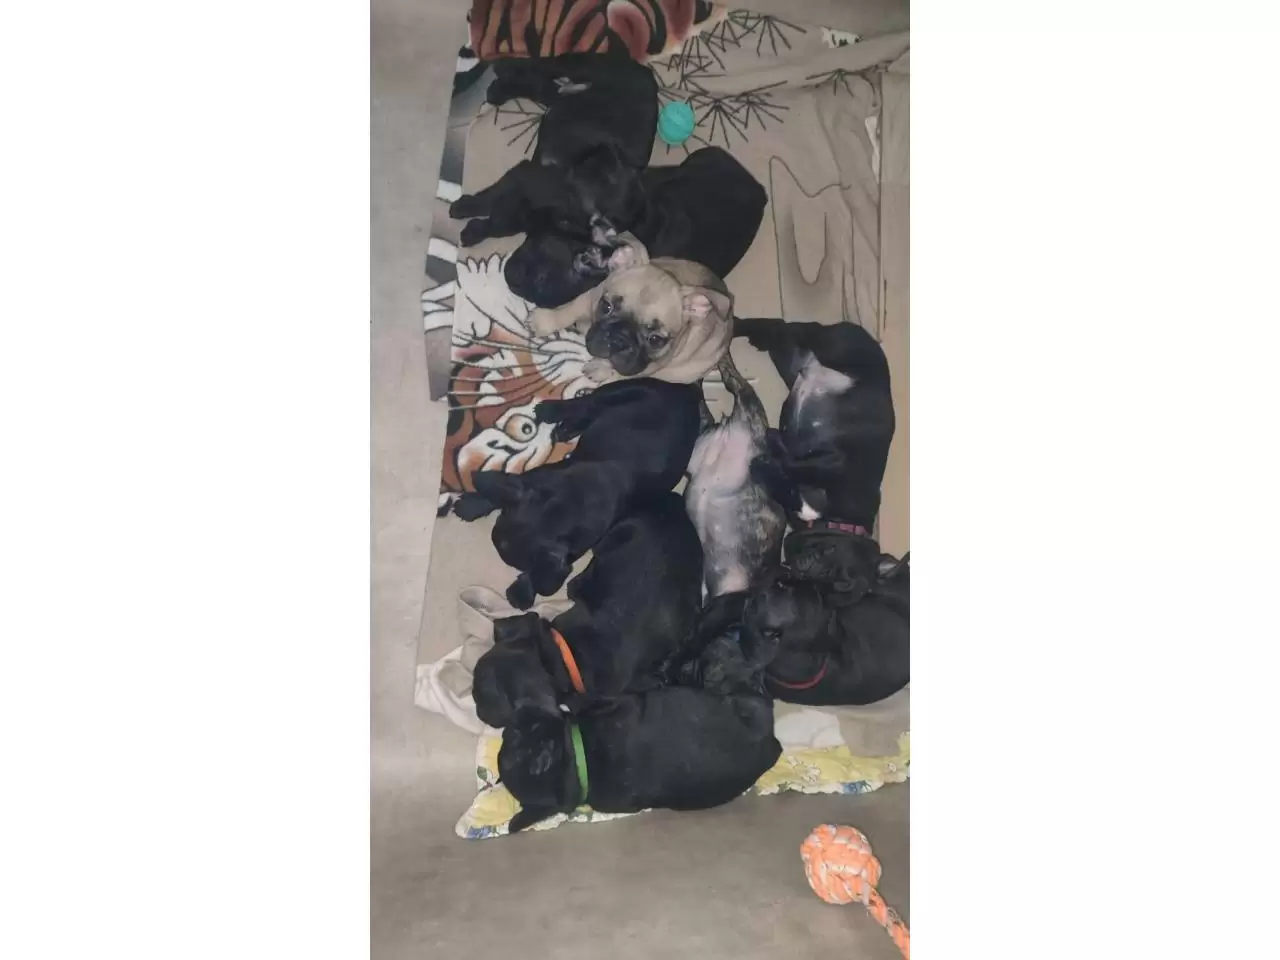 French bulldog puppies for sale - 10/11